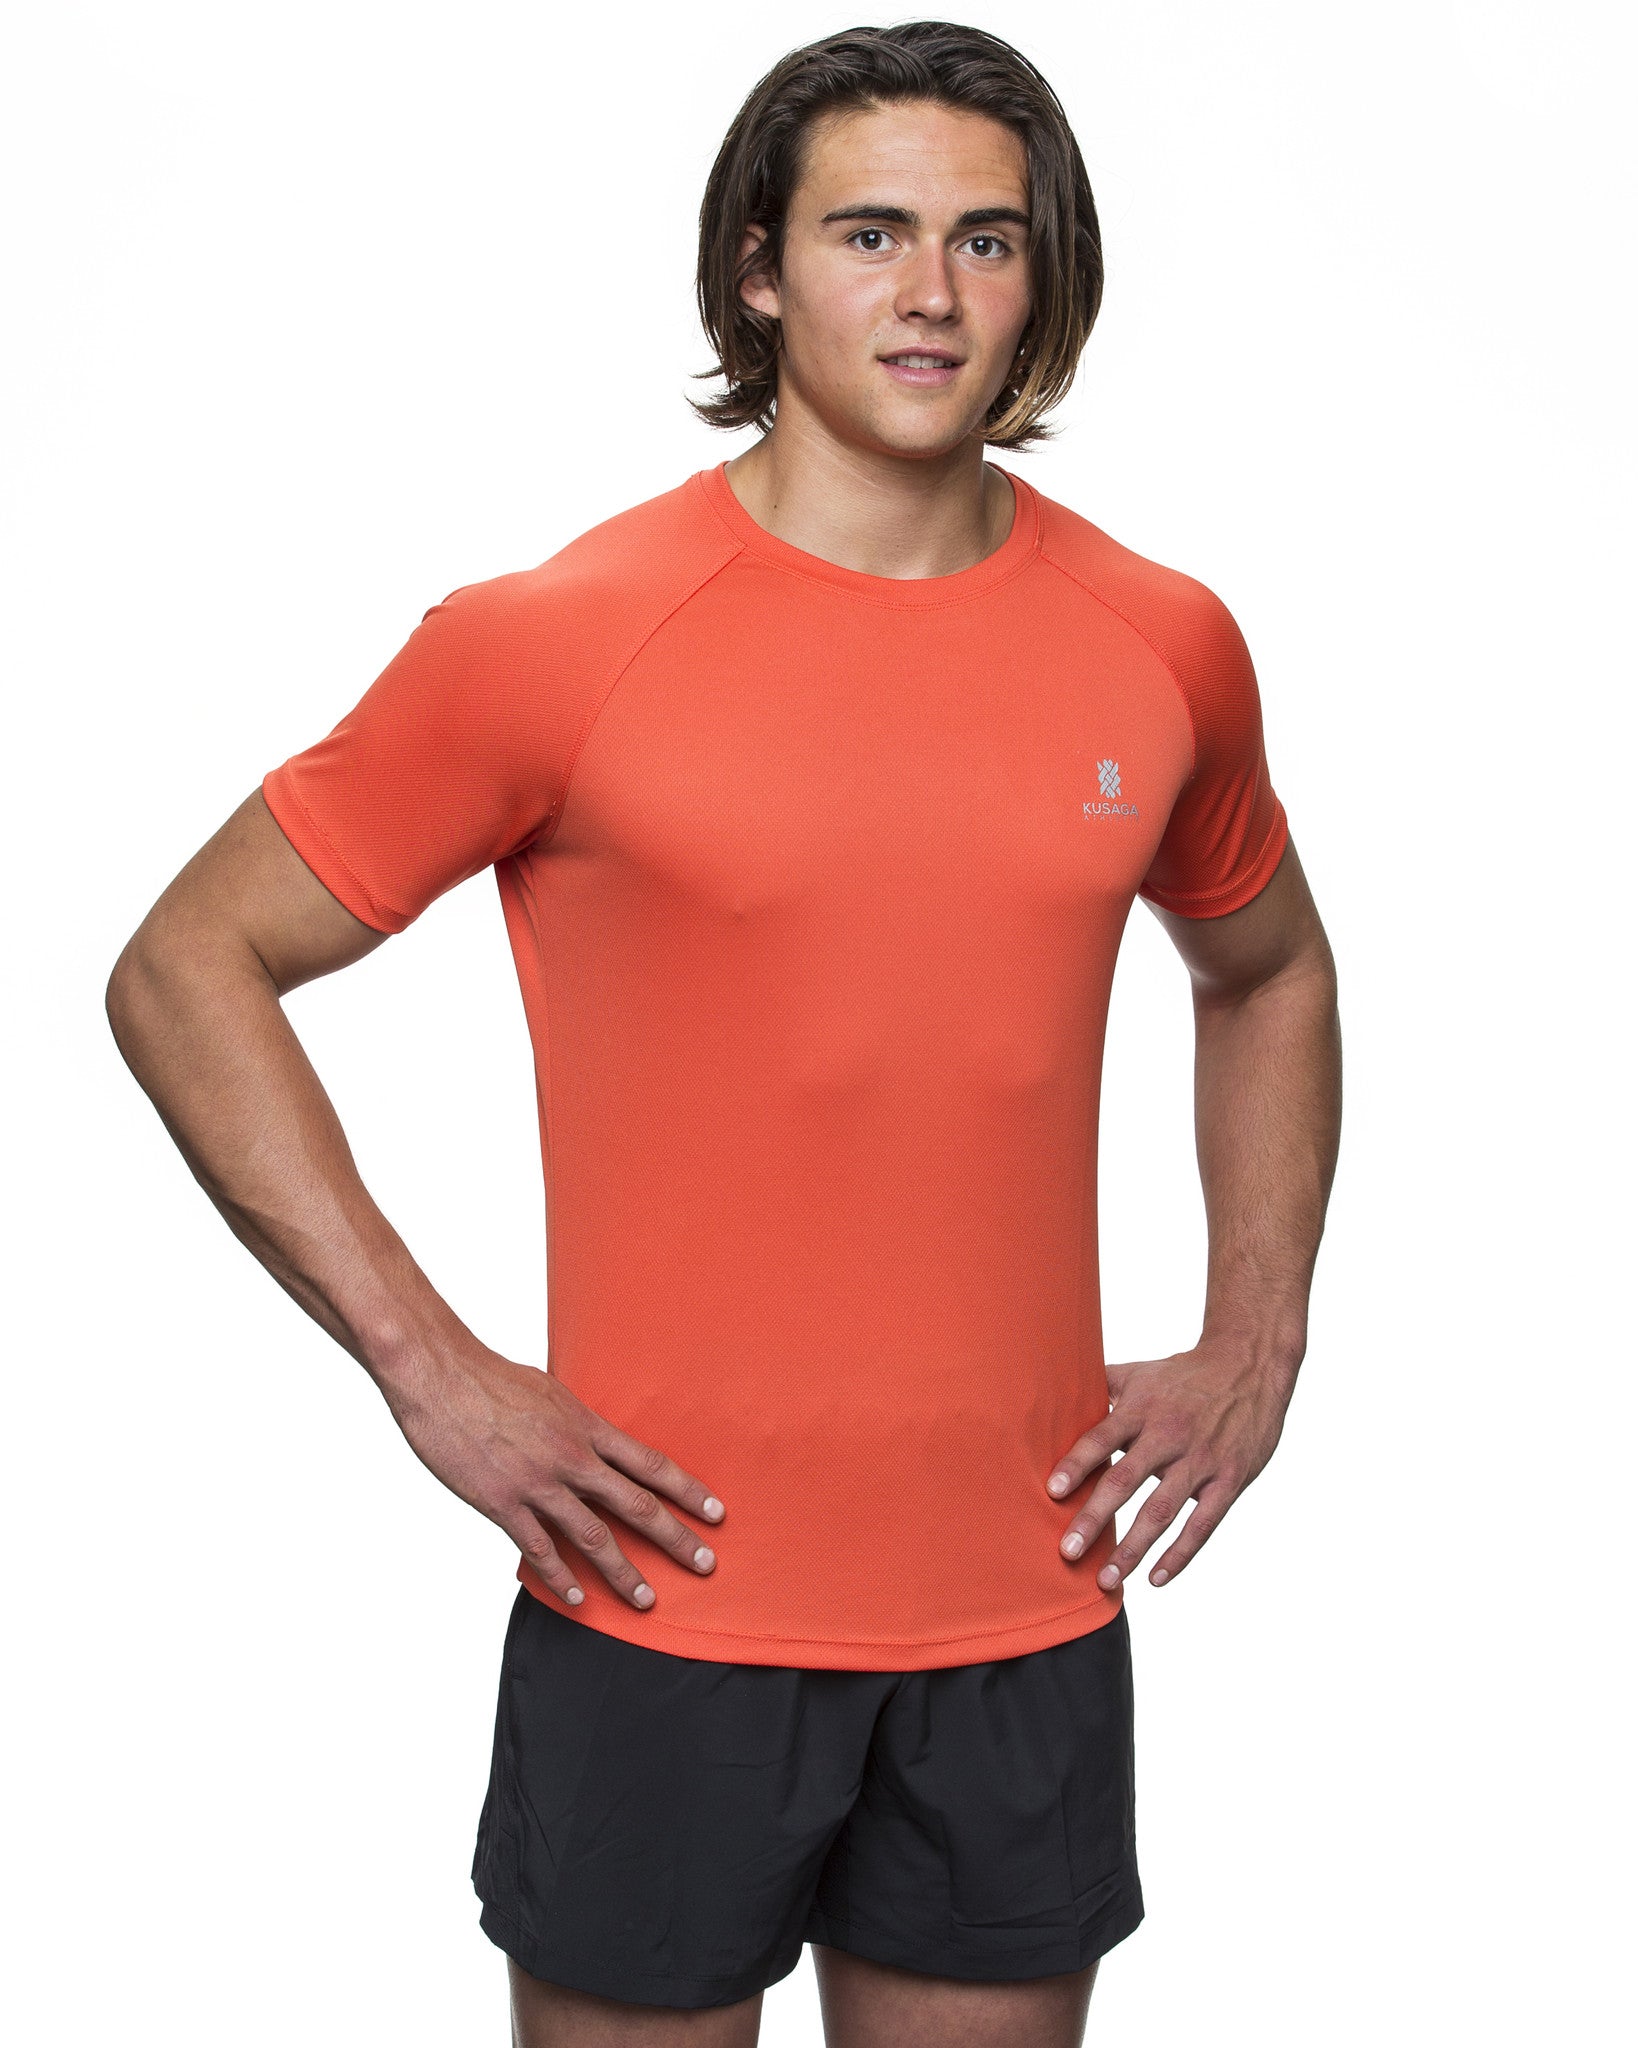 Men's sportswear and activewear collection